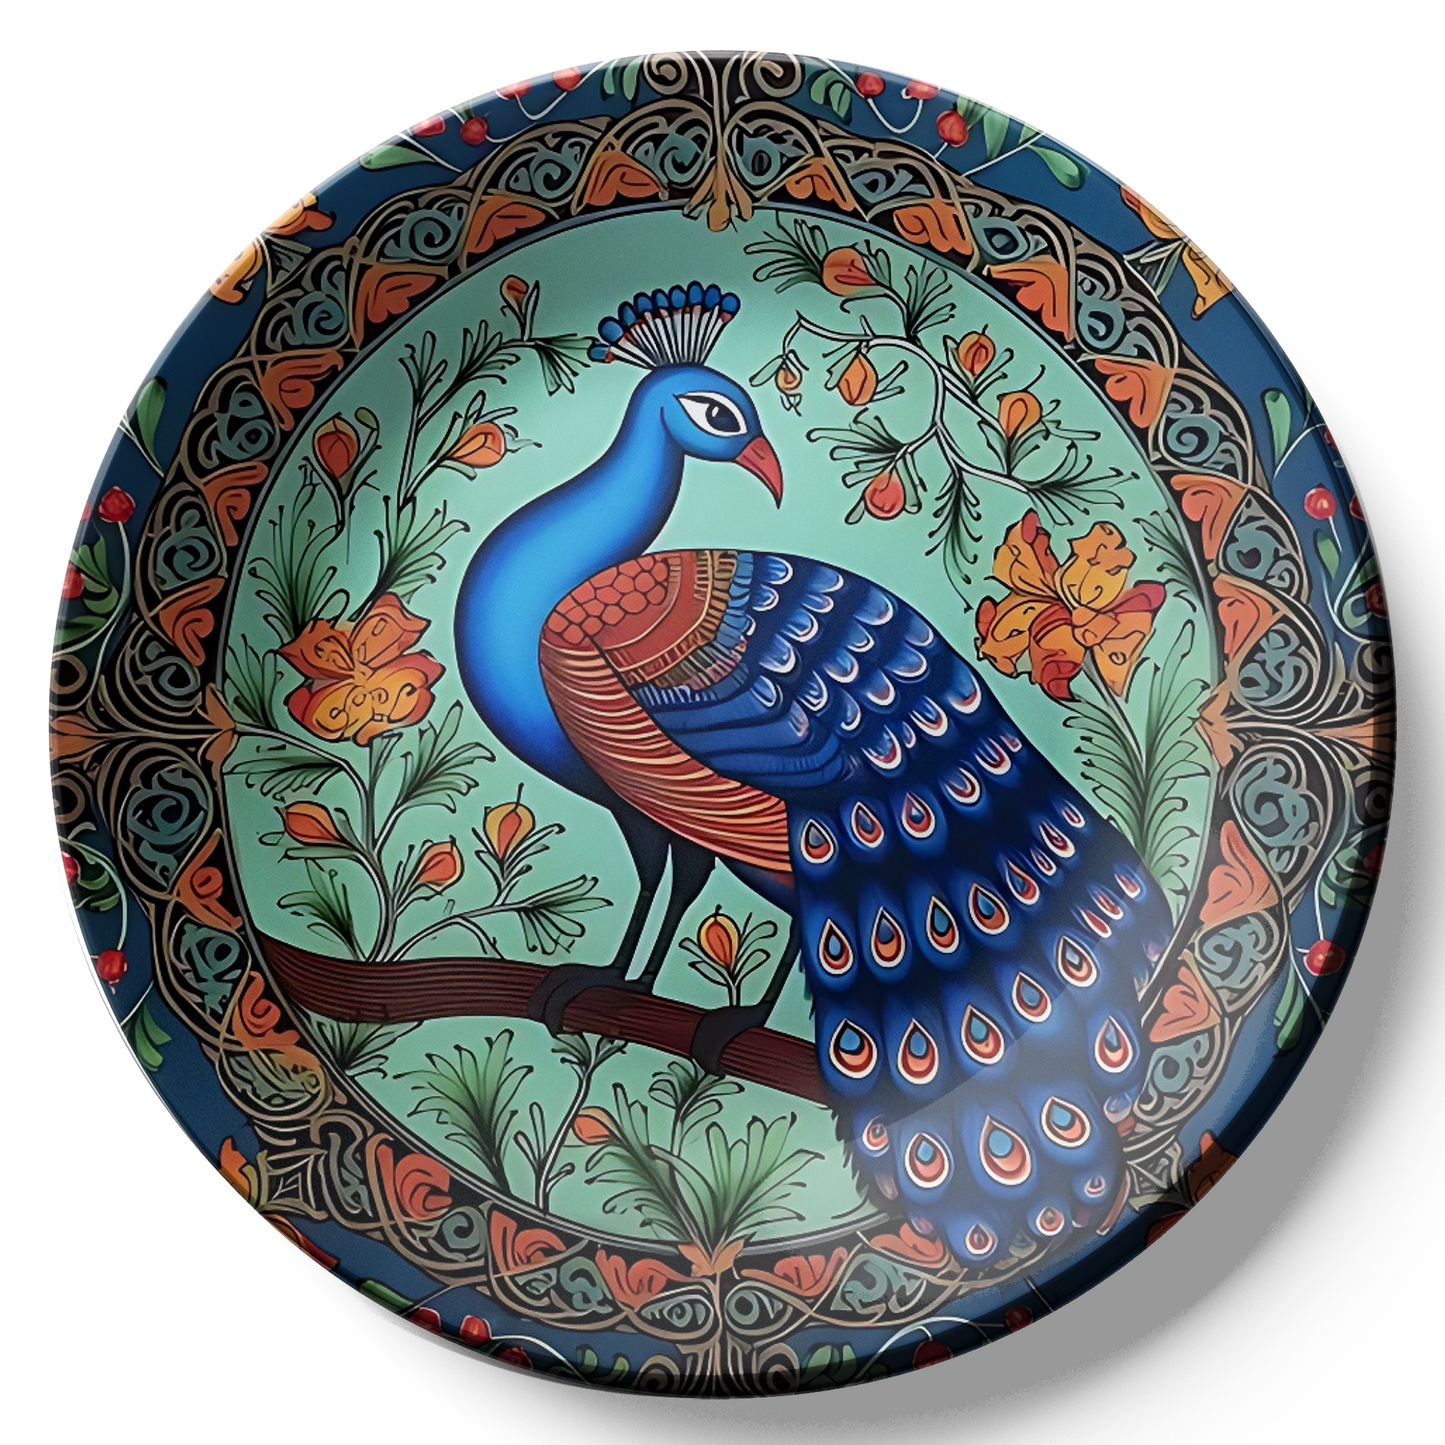 peacock sitting on tree decorative plates design for home decor